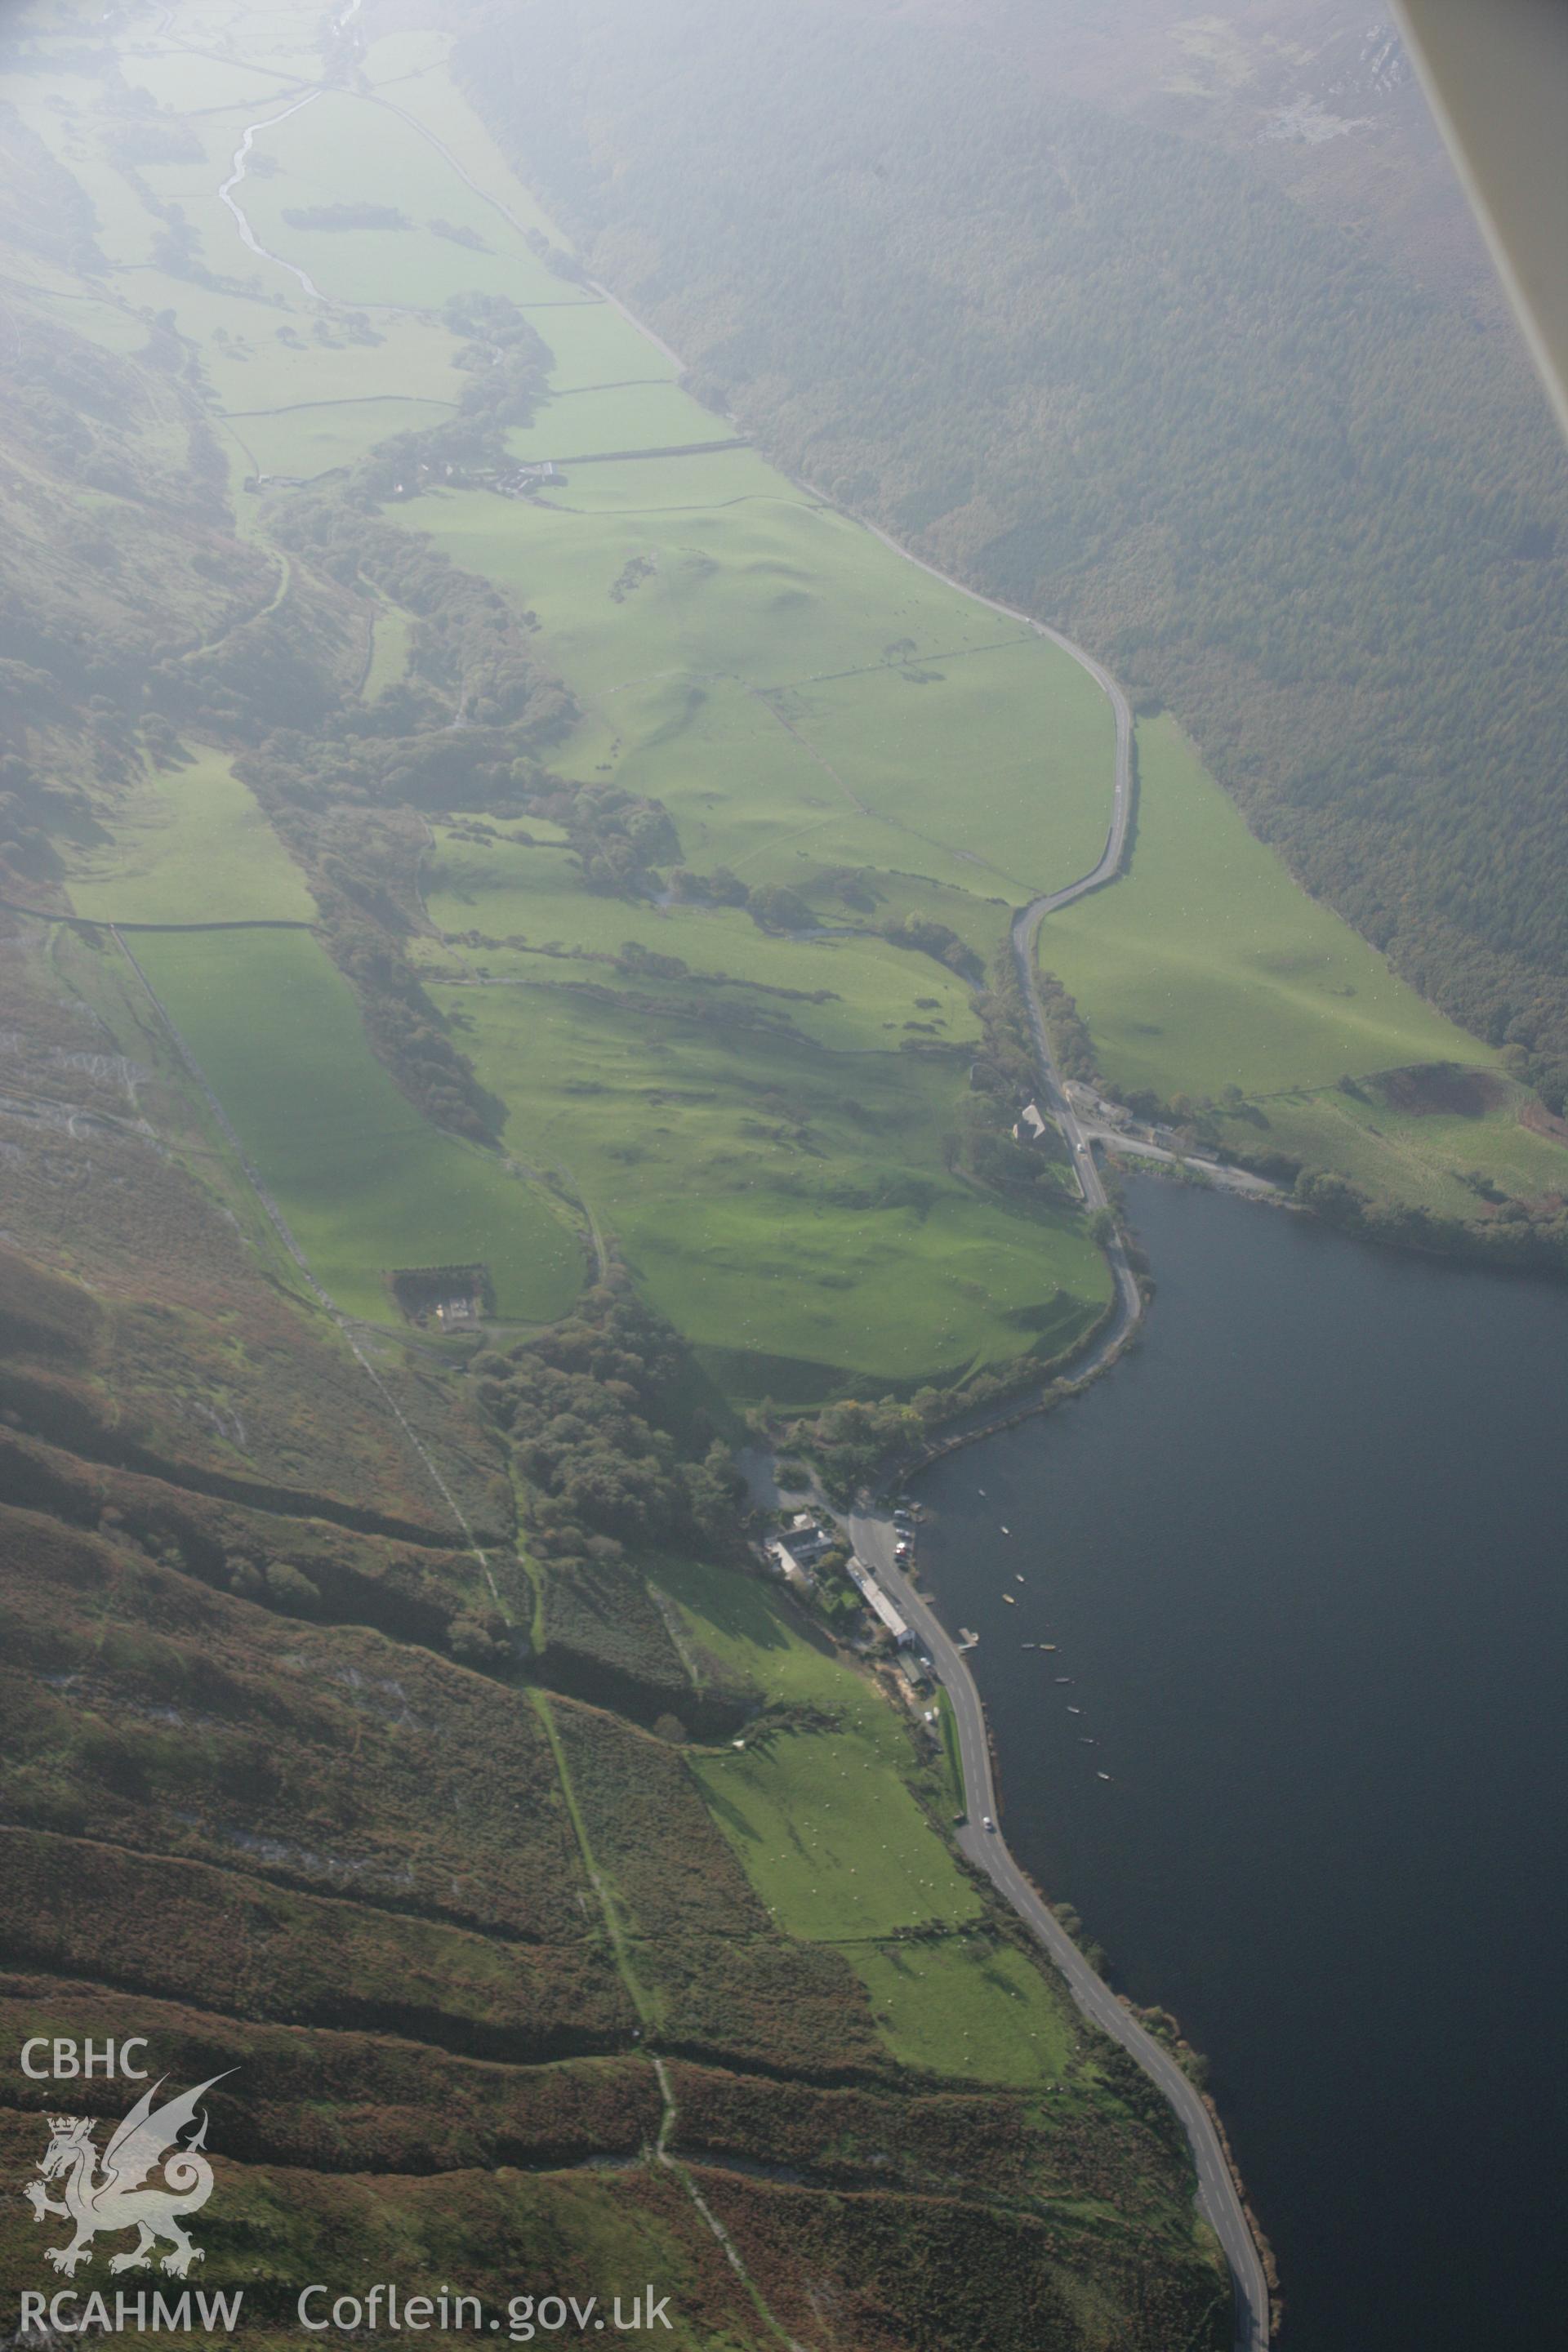 RCAHMW colour oblique aerial photograph of Tal-y-Llyn Lake looking south-west. Taken on 17 October 2005 by Toby Driver